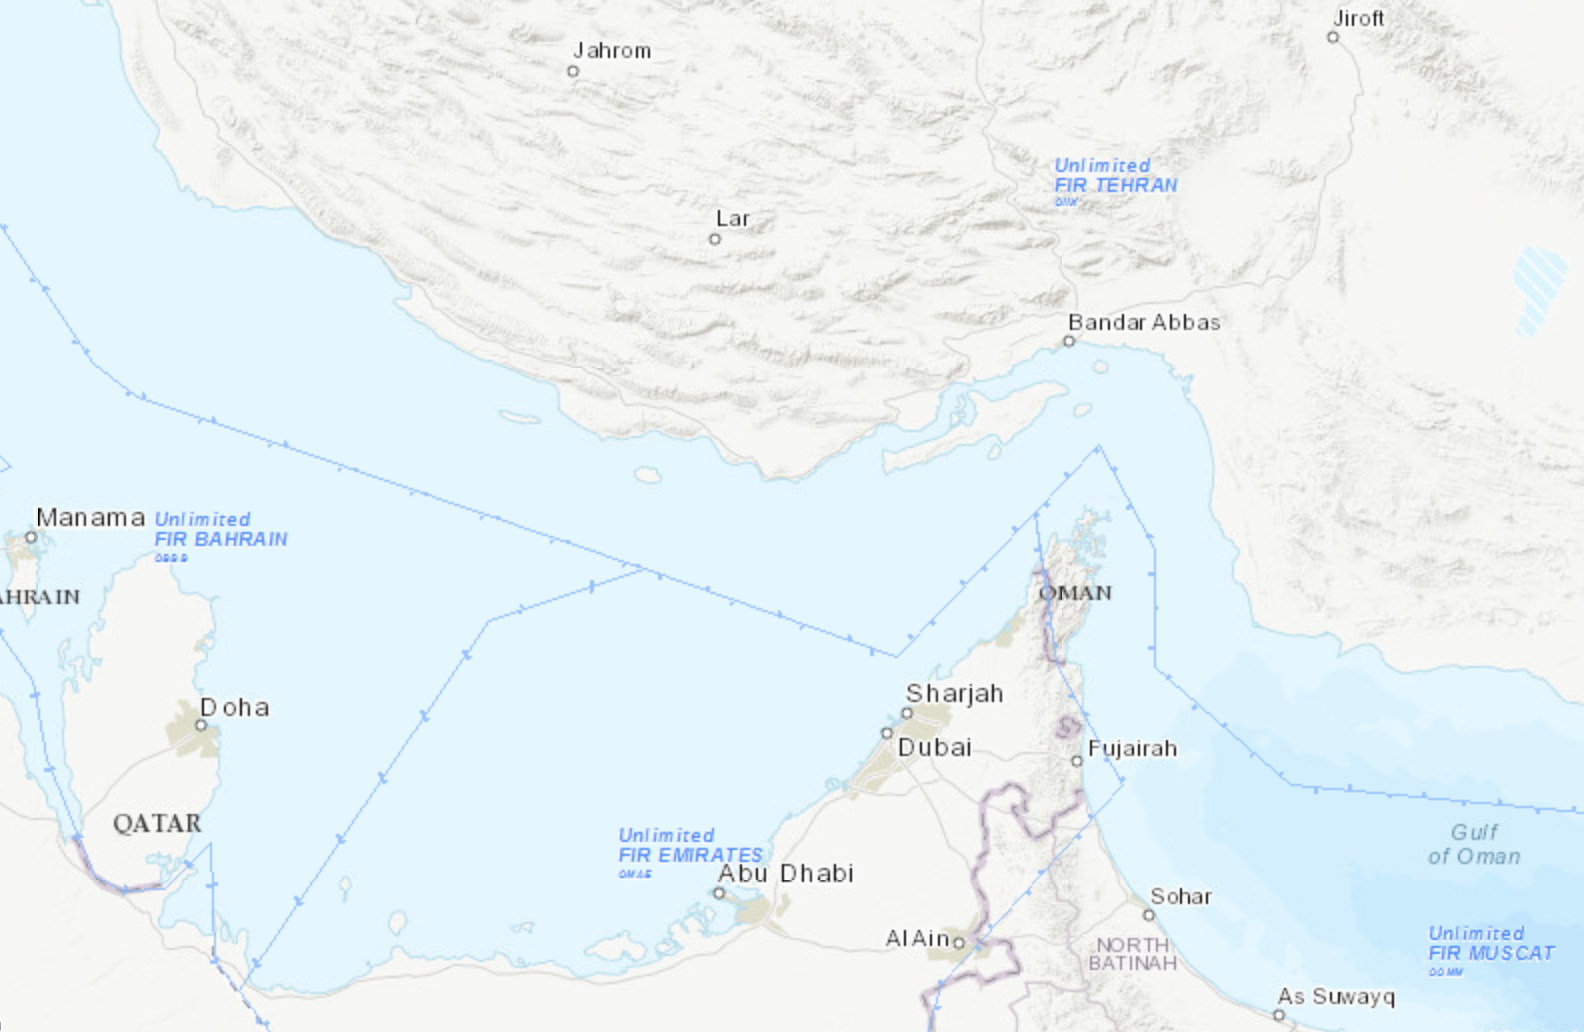 Gulf tension: Iran controls all the skies in the upper part of the map